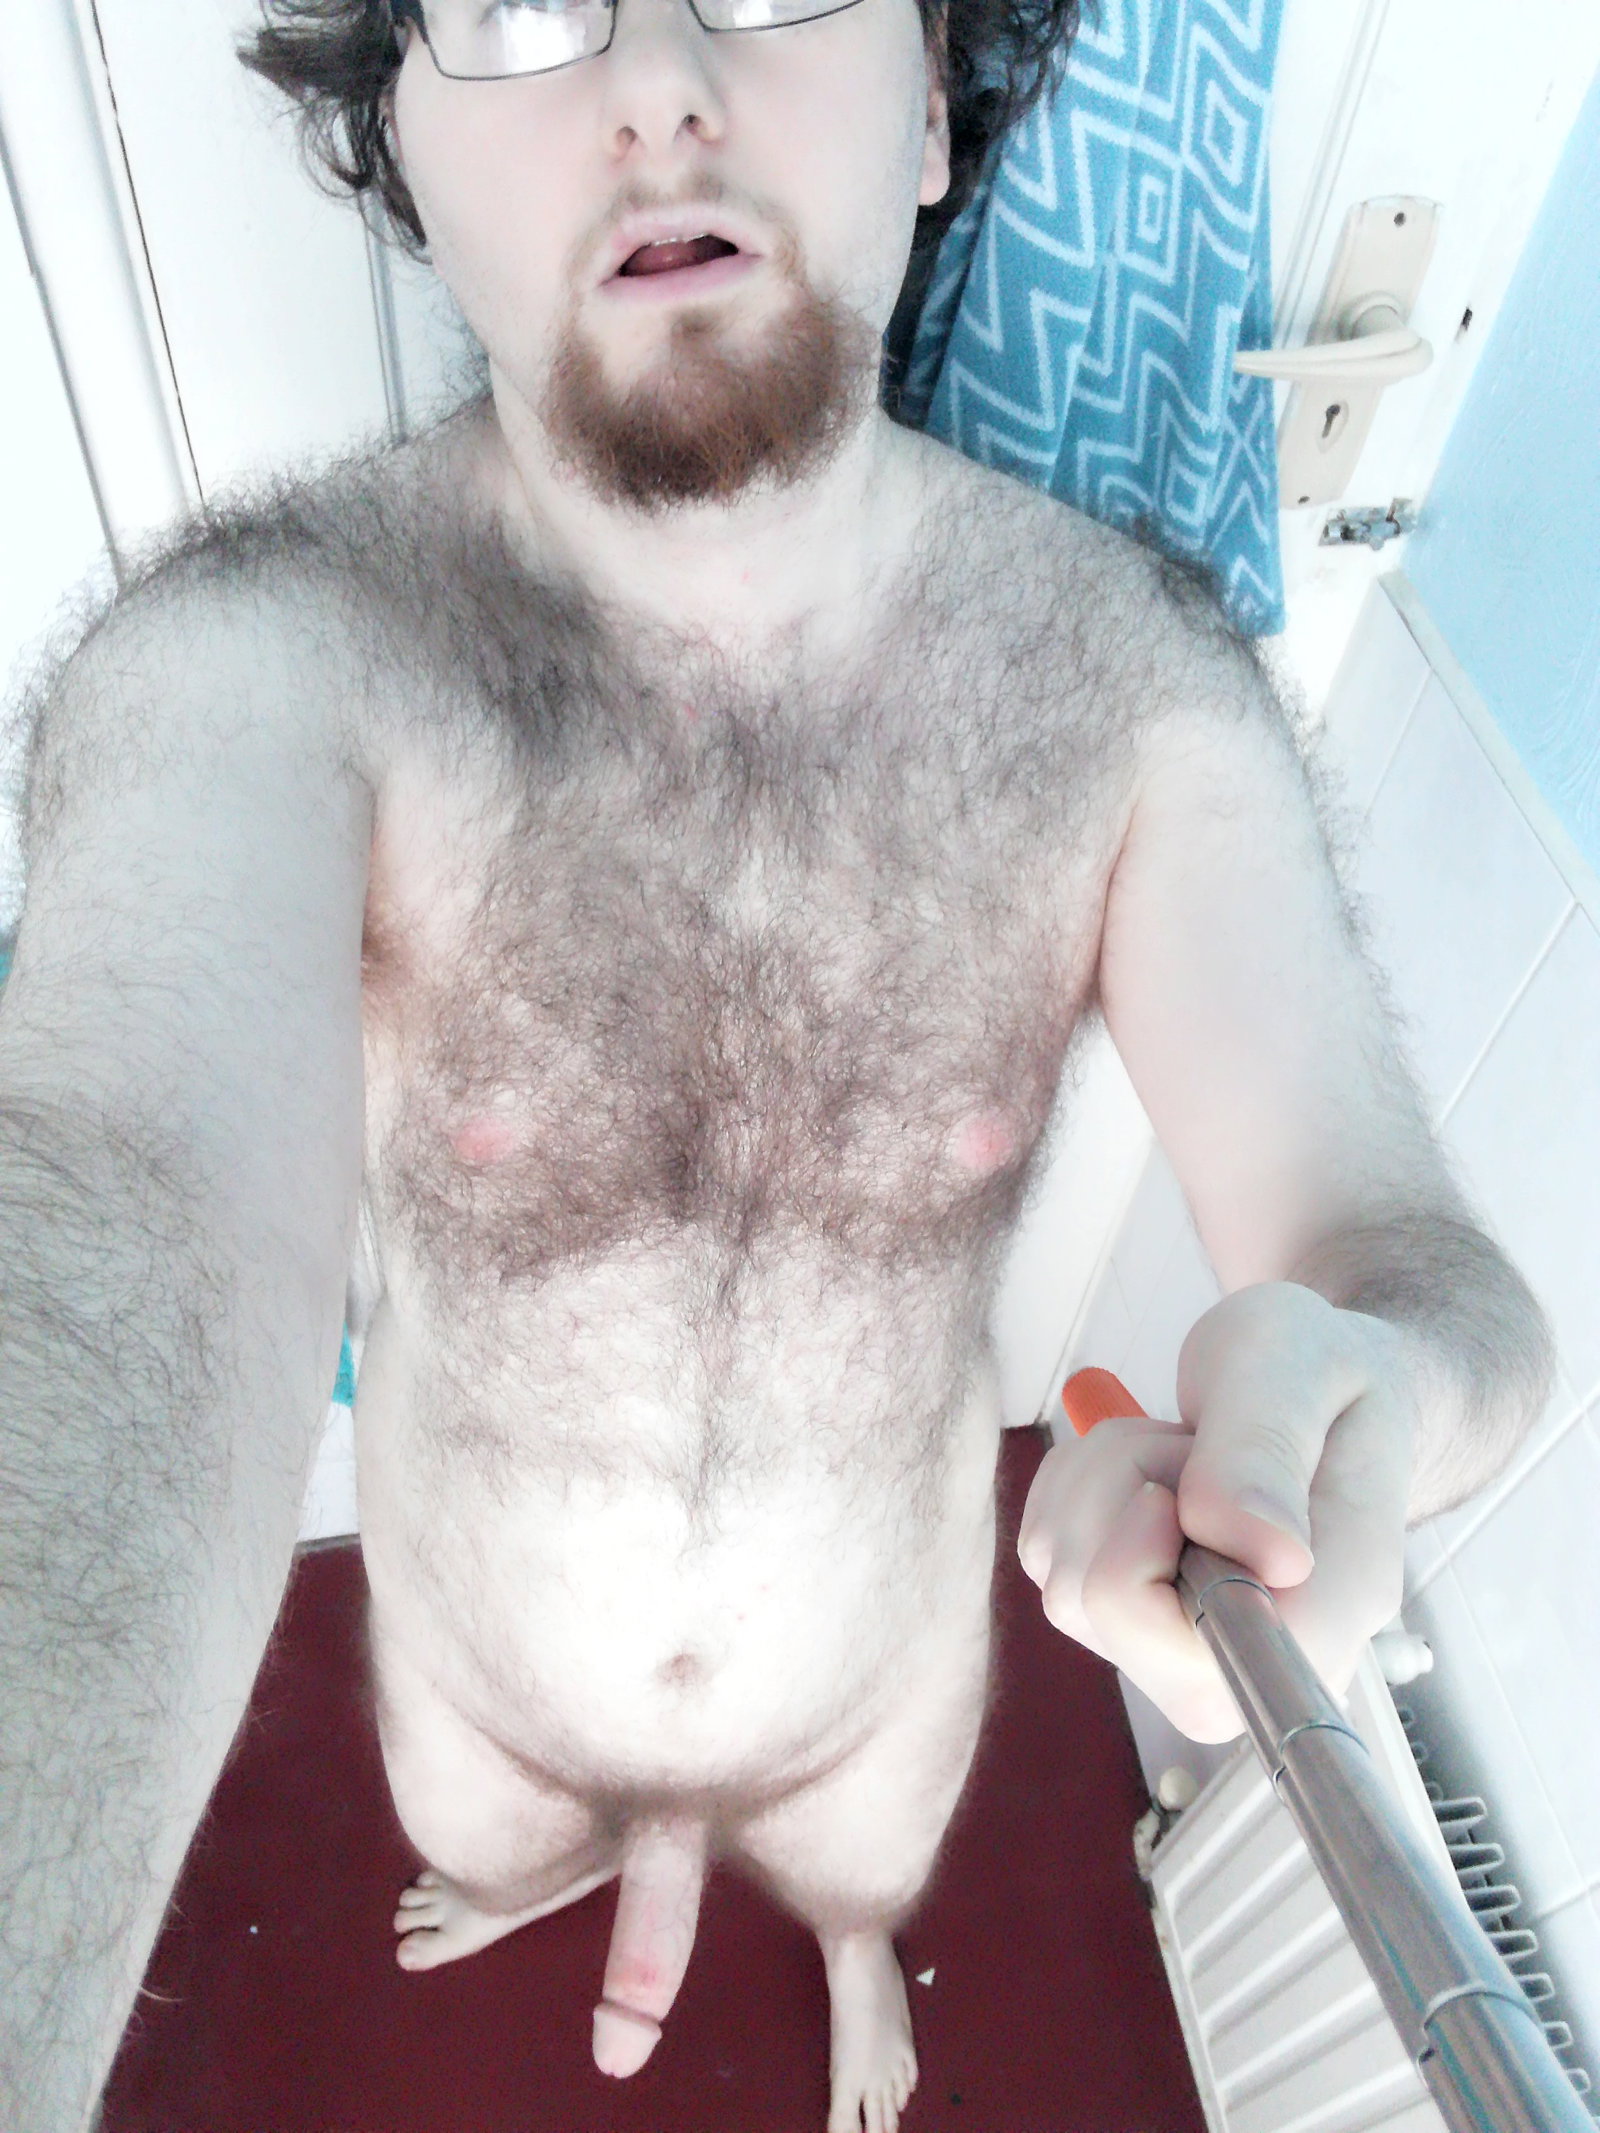 Photo by CatBoi with the username @CatBoi, who is a verified user, posted on January 5, 2019 and the text says '#naked #nude #amateur #hairy #selfie #bathroom #me'